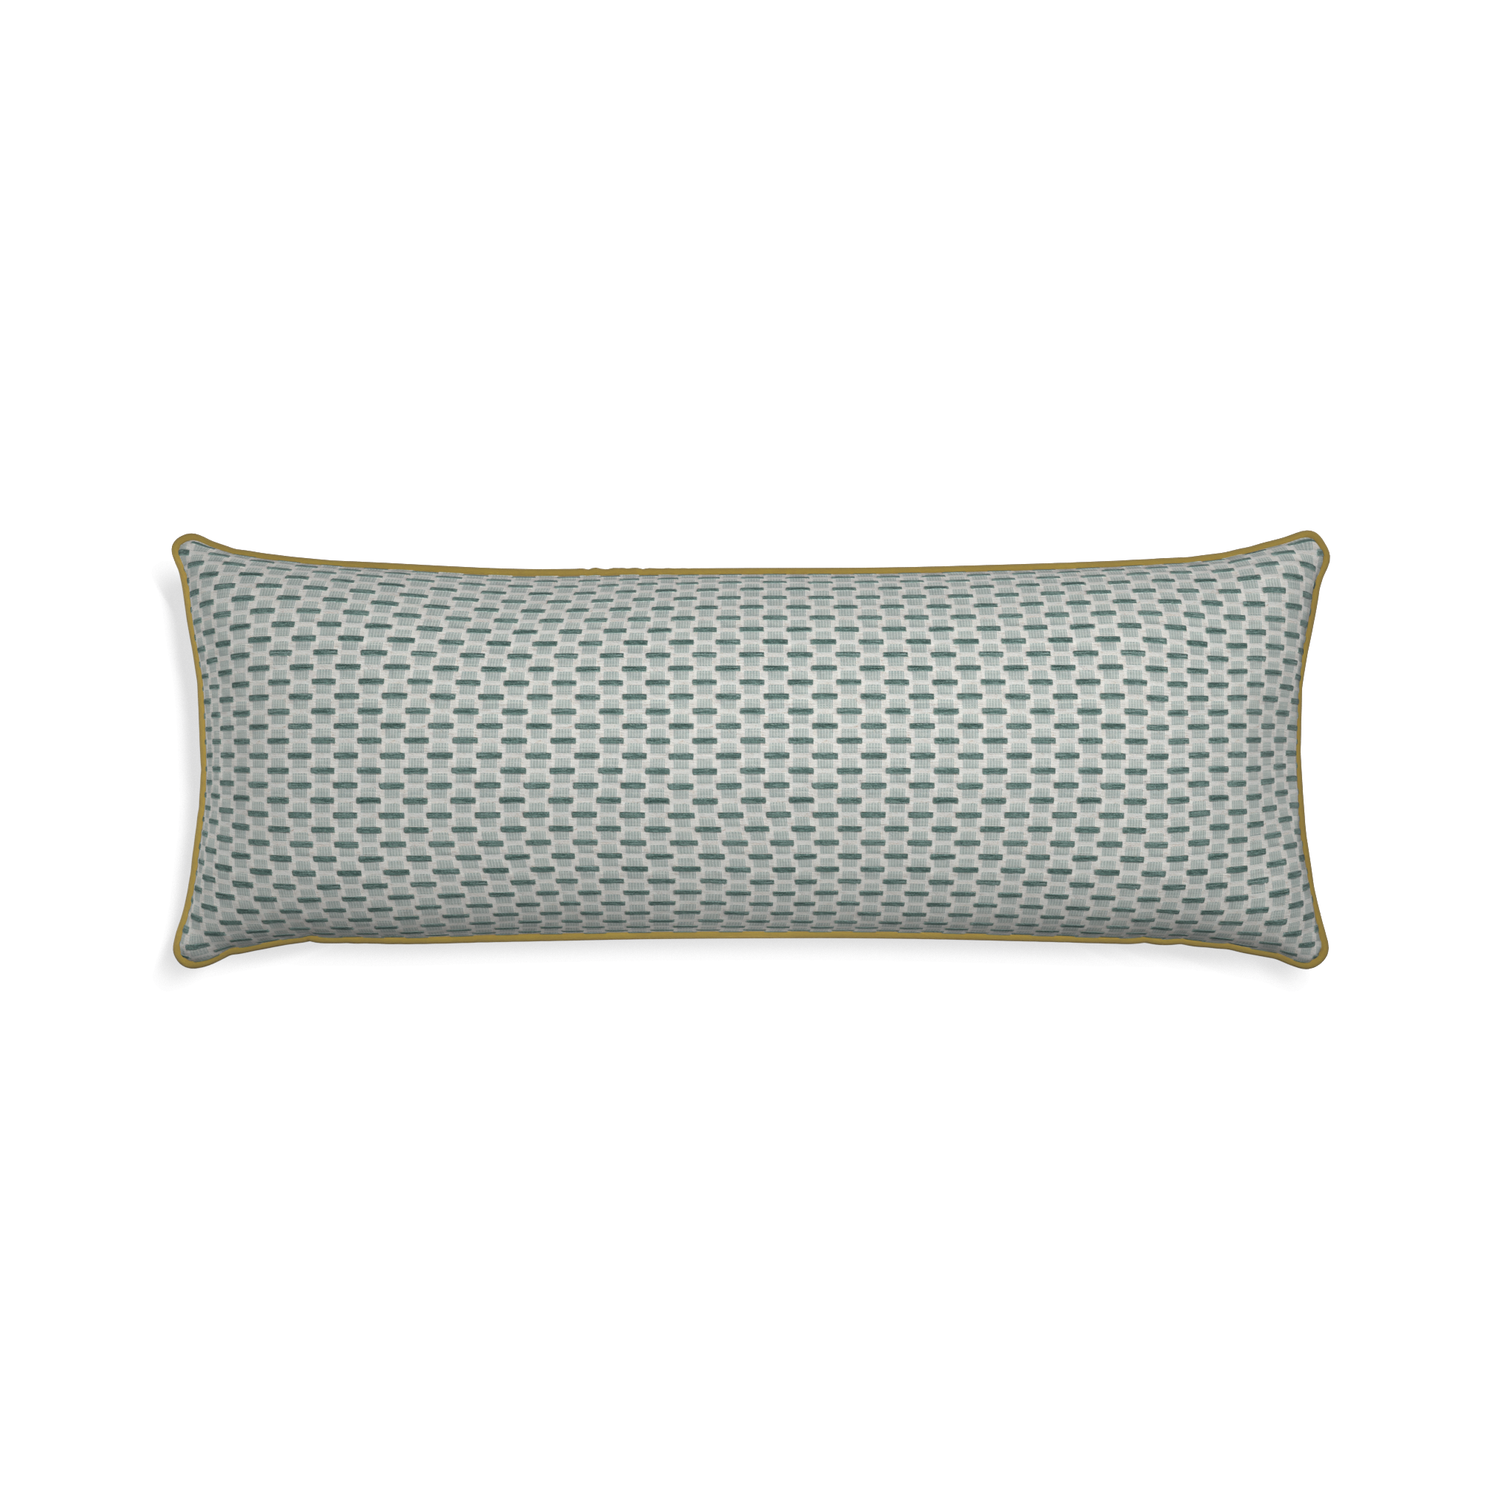 Xl-lumbar willow mint custom green geometric chenillepillow with c piping on white background